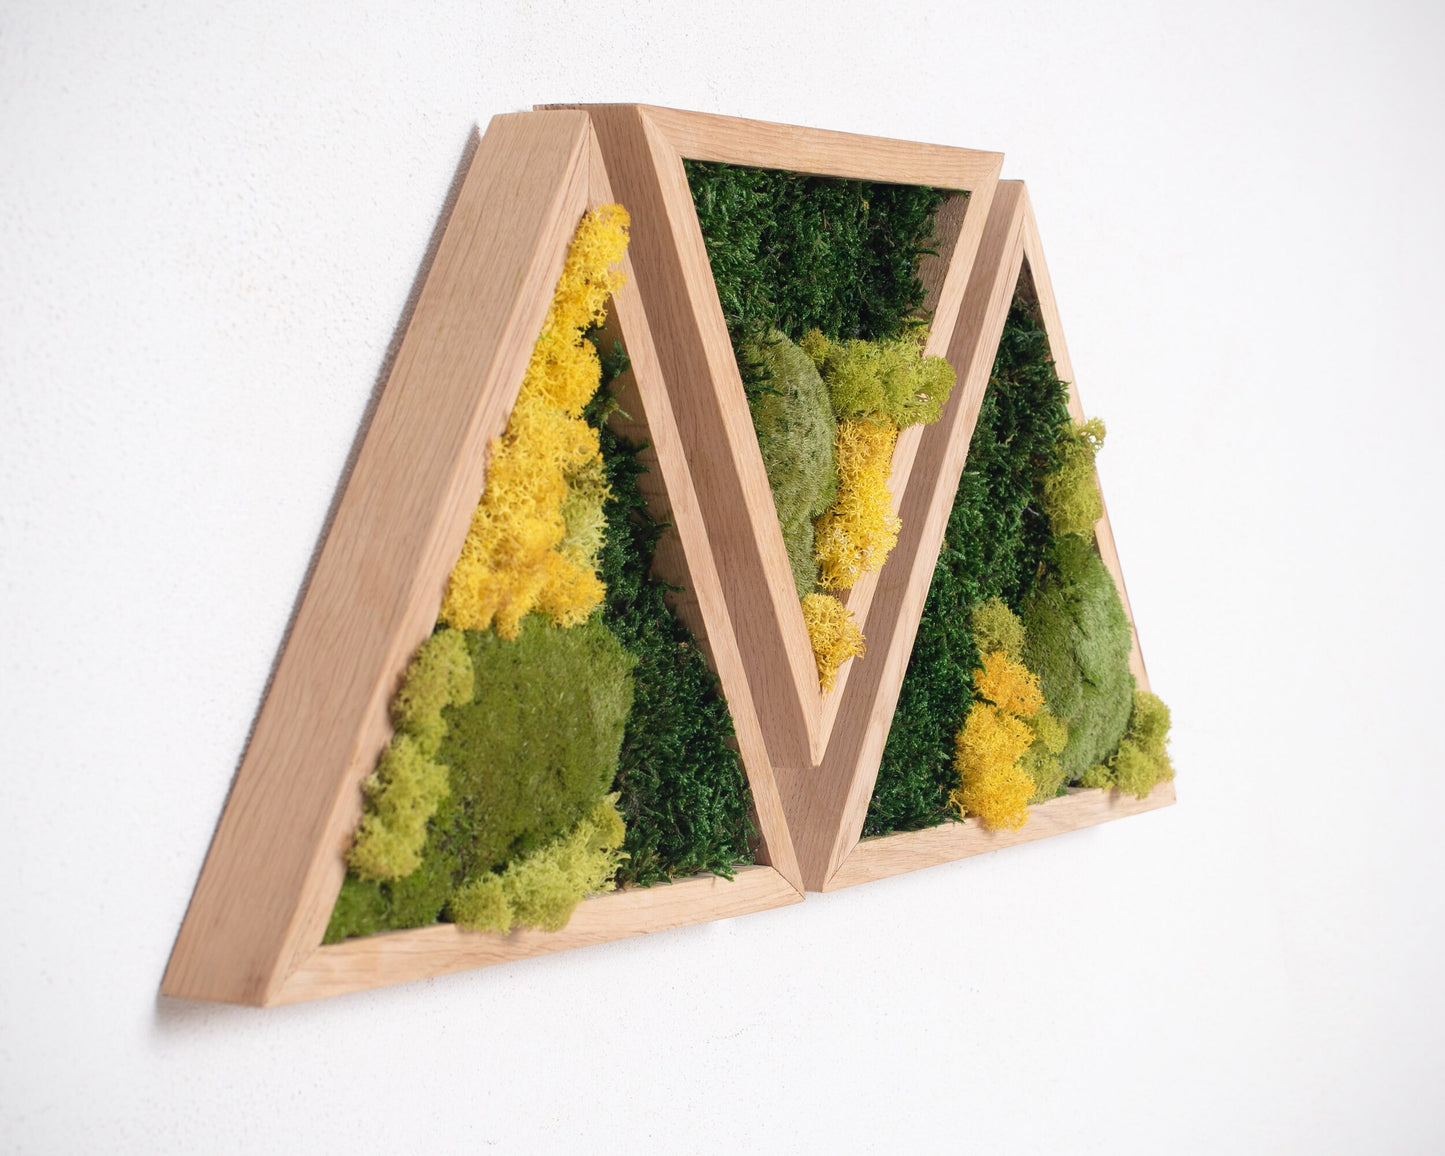 Minimalist Moss Living Wall Art: The Perfect Christmas Gift for Minimalist Decor Lovers